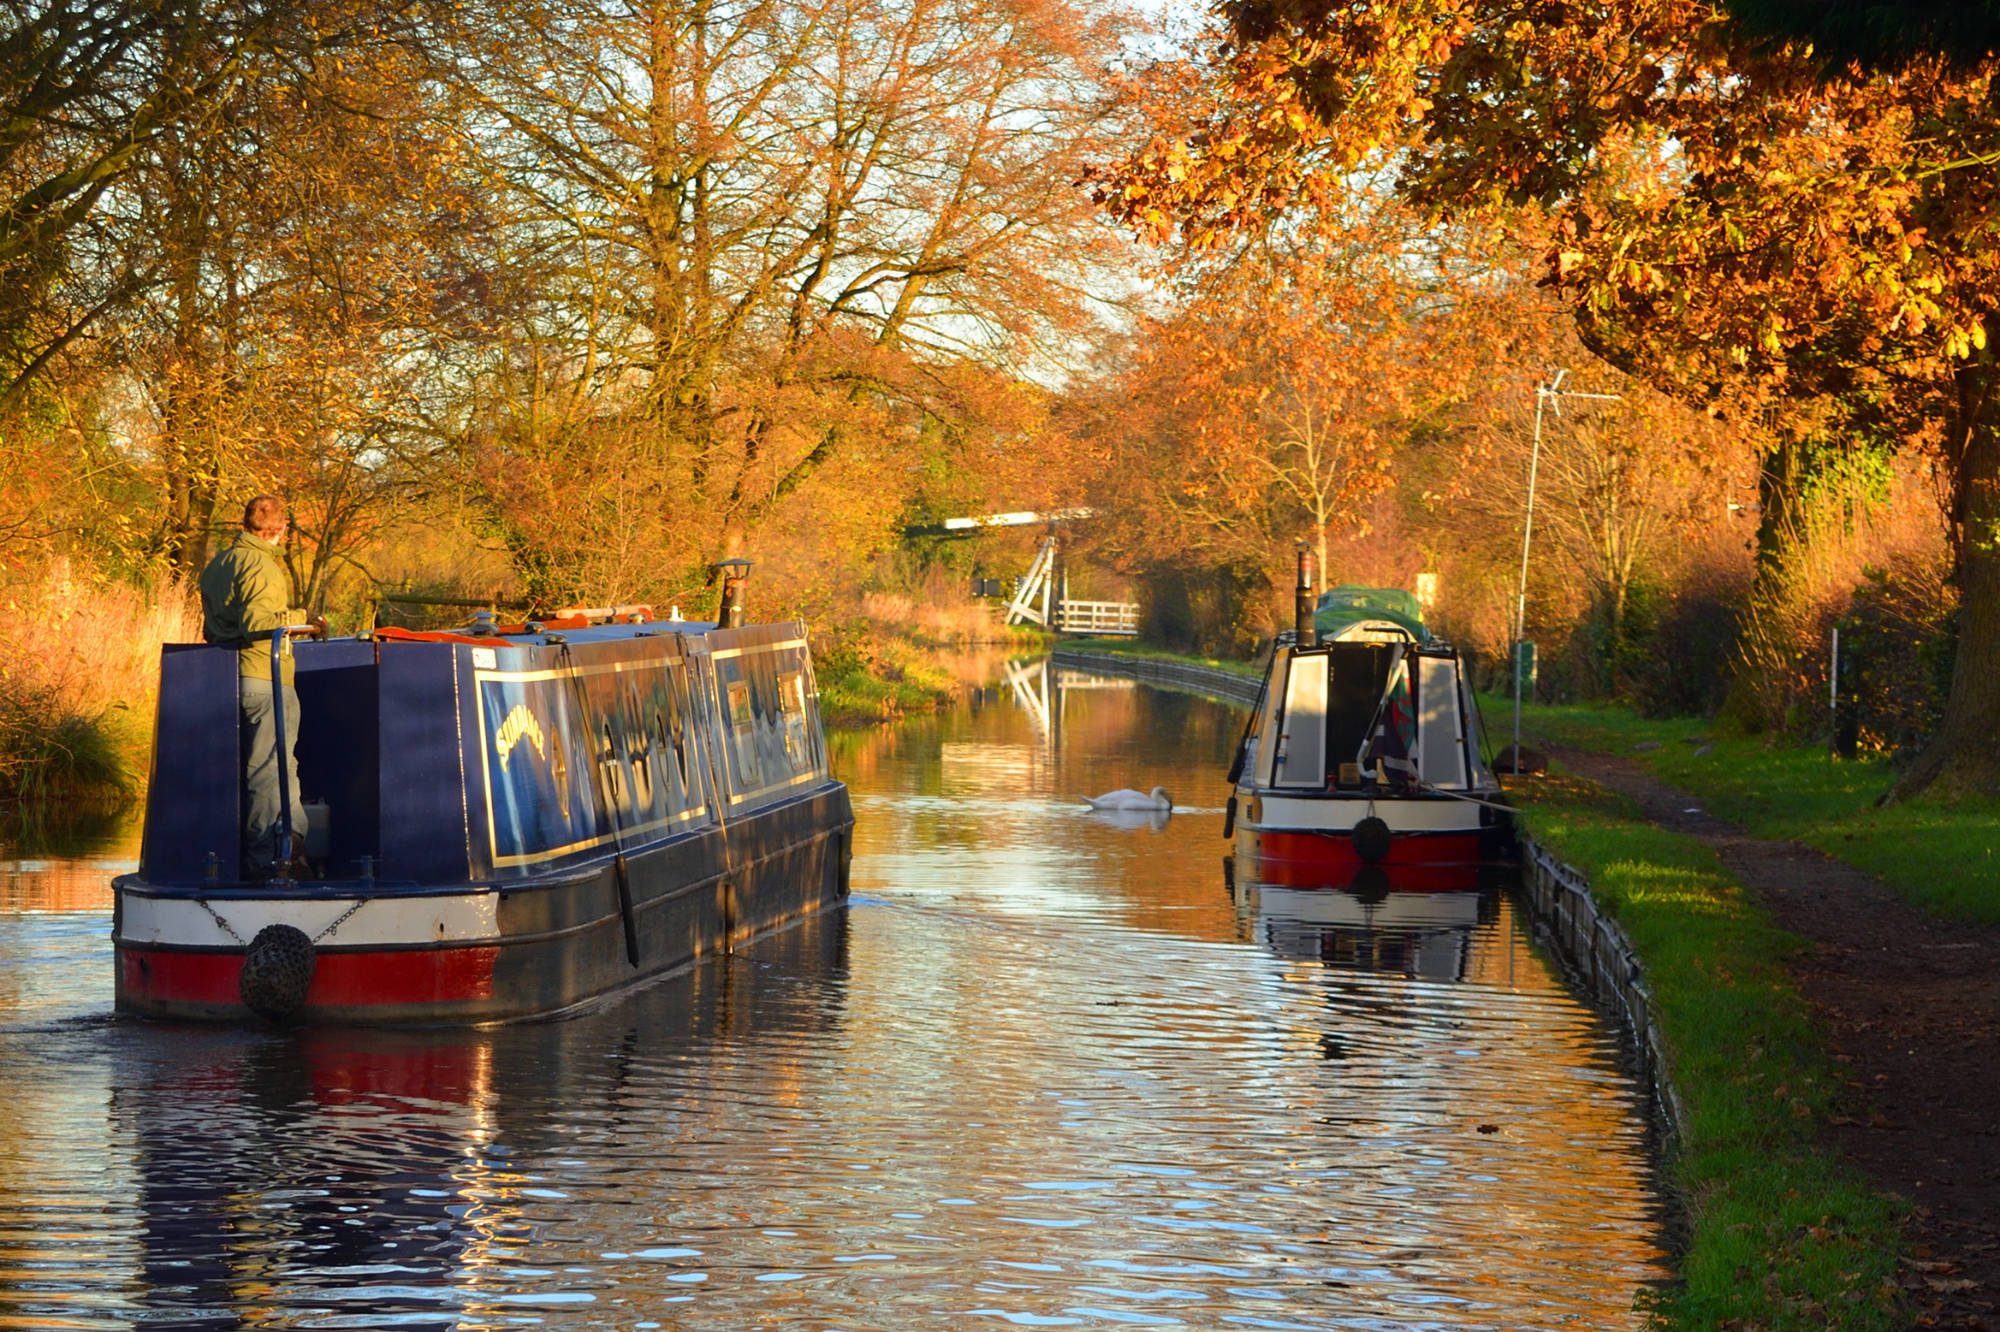 Canal boat in autumn on the Llangollen canal